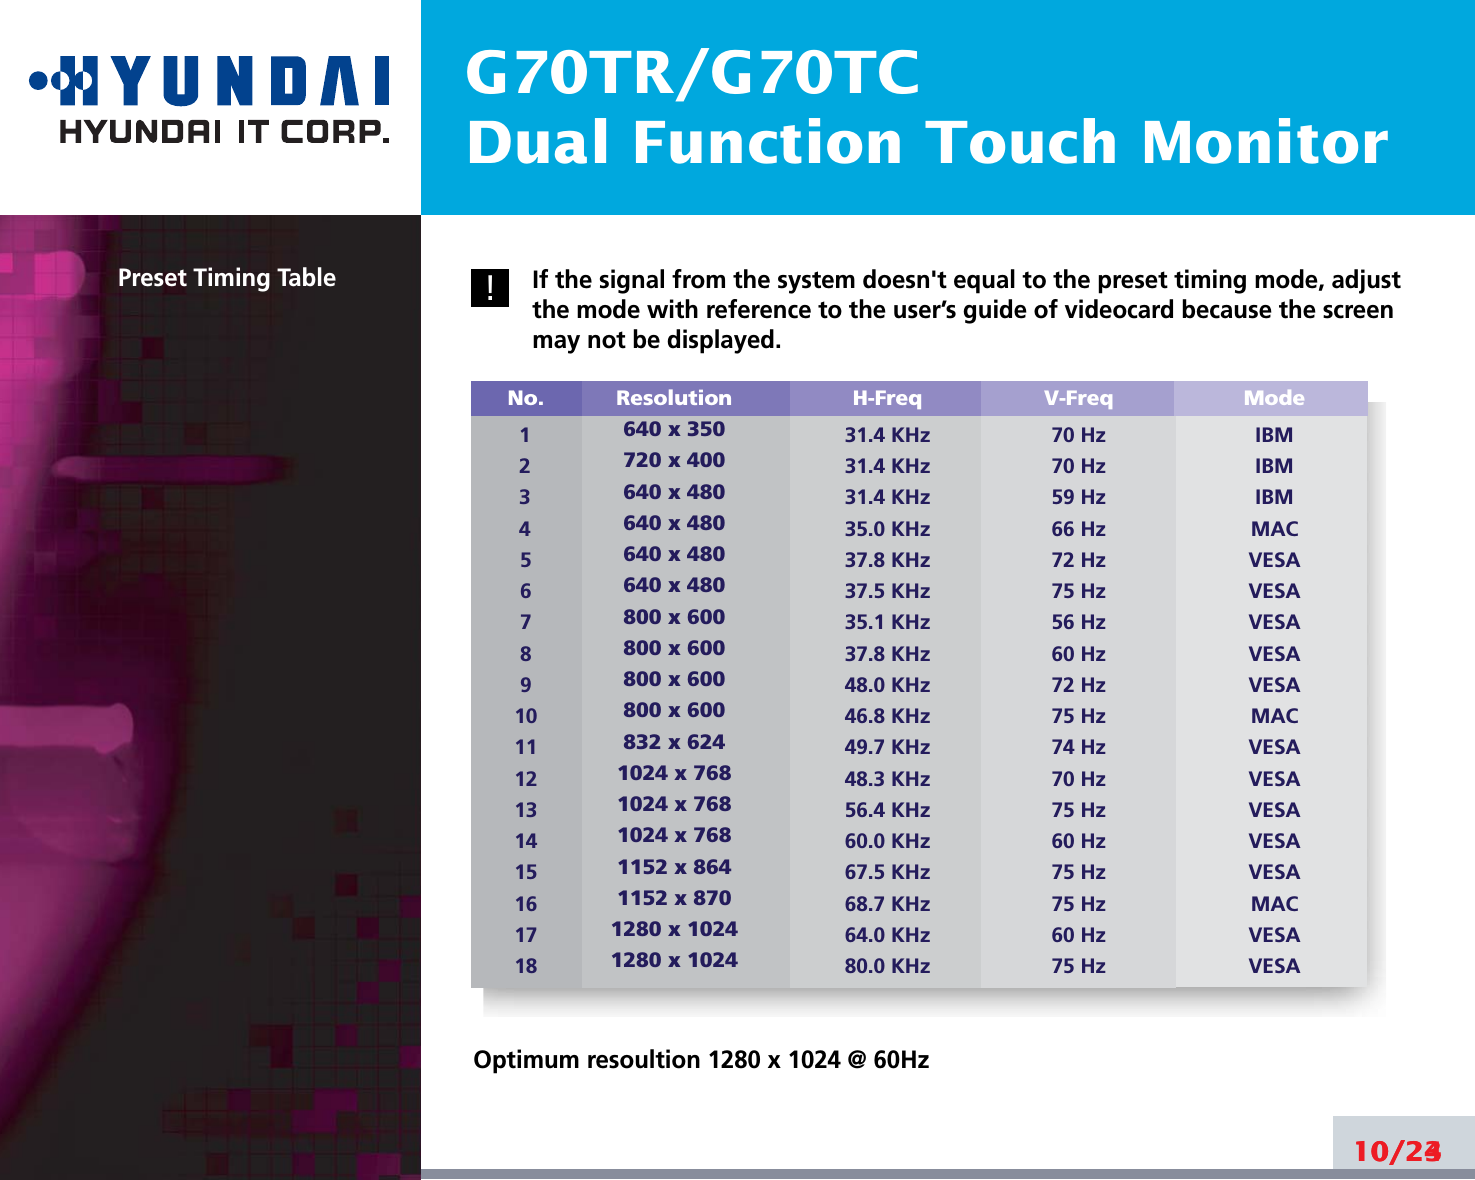 G70TR/G70TCDual Function Touch Monitor10/24Preset Timing Table10/23If the signal from the system doesn&apos;t equal to the preset timing mode, adjustthe mode with reference to the user’s guide of videocard because the screenmay not be displayed.Optimum resoultion 1280 x 1024 @ 60Hz No.123456789101112131415161718Resolution640 x 350720 x 400640 x 480640 x 480640 x 480640 x 480800 x 600800 x 600800 x 600800 x 600832 x 6241024 x 7681024 x 7681024 x 7681152 x 8641152 x 8701280 x 10241280 x 1024H-Freq31.4 KHz31.4 KHz31.4 KHz35.0 KHz37.8 KHz37.5 KHz35.1 KHz37.8 KHz48.0 KHz46.8 KHz49.7 KHz48.3 KHz56.4 KHz60.0 KHz67.5 KHz68.7 KHz64.0 KHz80.0 KHzV-Freq70 Hz70 Hz59 Hz66 Hz72 Hz75 Hz56 Hz60 Hz72 Hz75 Hz74 Hz70 Hz75 Hz60 Hz75 Hz75 Hz60 Hz75 HzModeIBMIBMIBMMACVESAVESAVESAVESAVESAMACVESAVESAVESAVESAVESAMACVESAVESA!